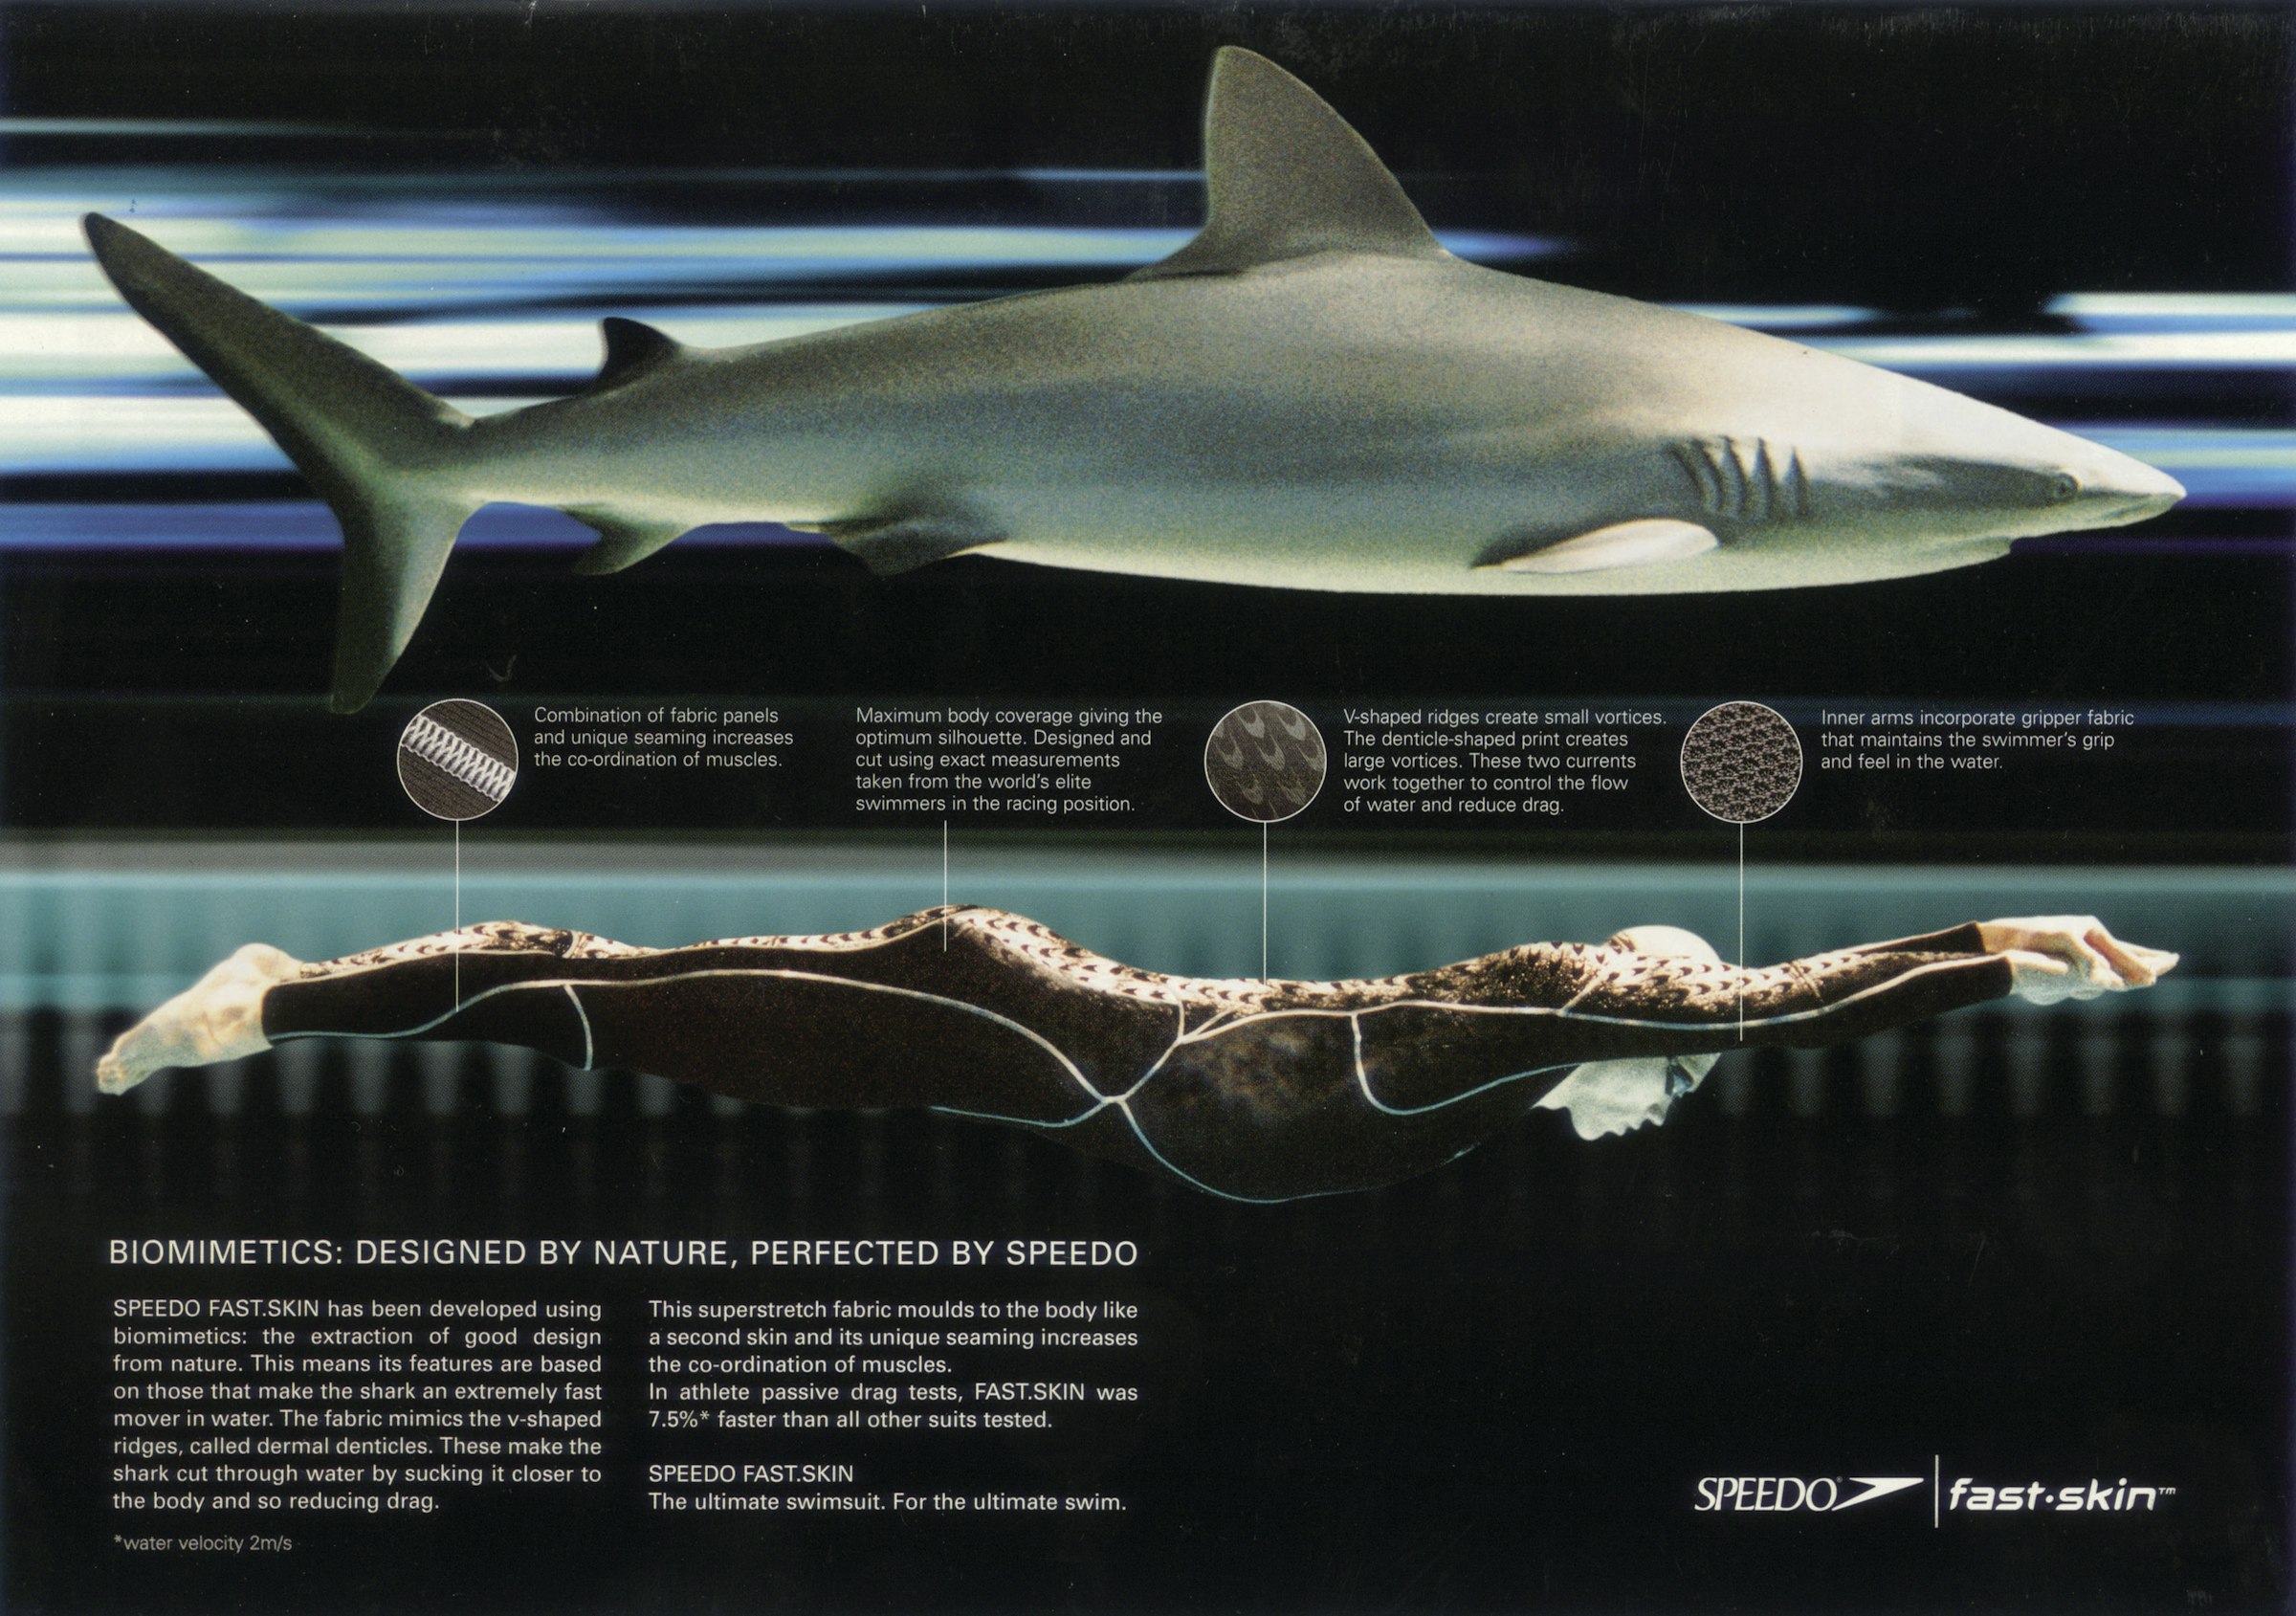 The promotional material of 'FASTSKIN®', which was released before 'LZR Racer®. The image of a shark was used, reflecting the shark skin-inspired design. The innovation at that time was to cover the hands and feet like a wetsuit to minimize water resistance and maintain a straight posture underwater.